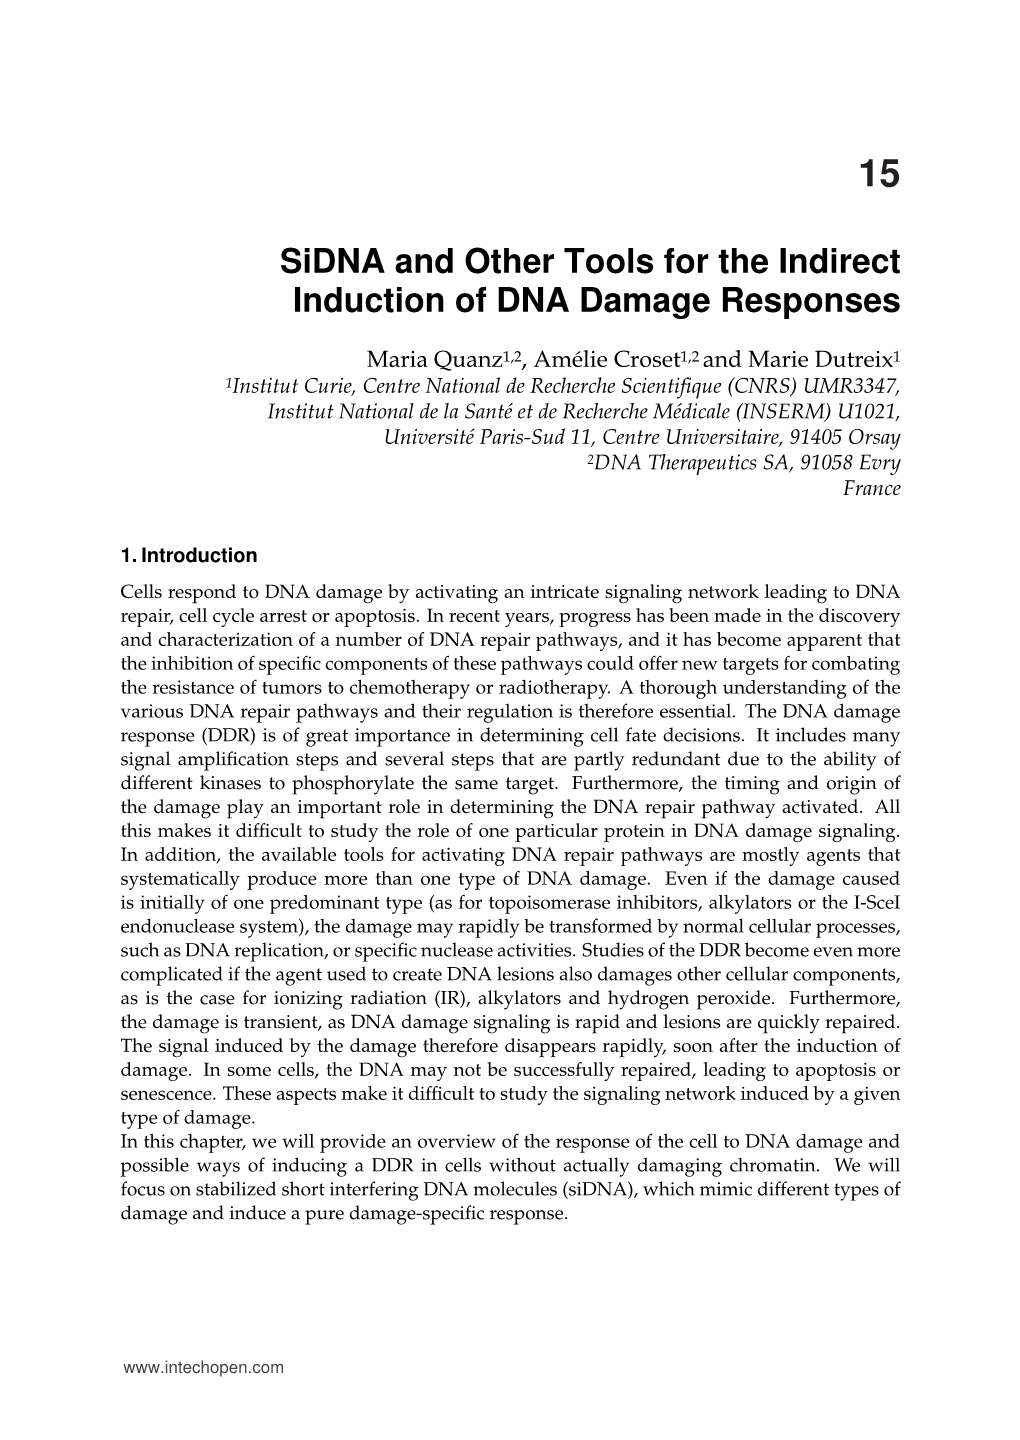 Sidna and Other Tools for the Indirect Induction of DNA Damage Responses